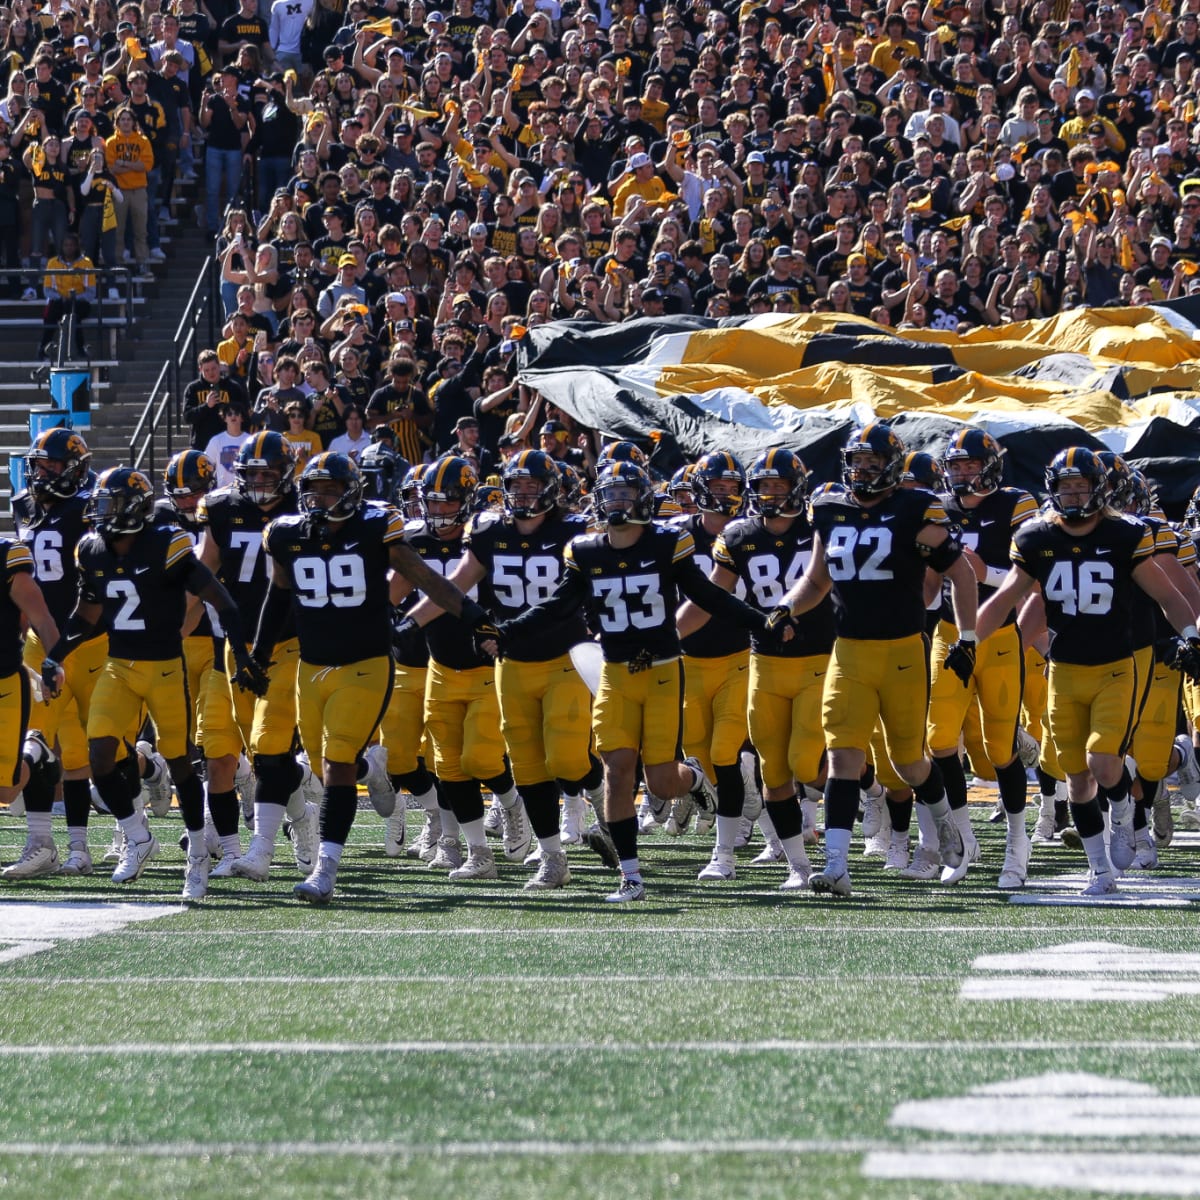 Enjoy Iowa's 2023 football schedule because they'll never be